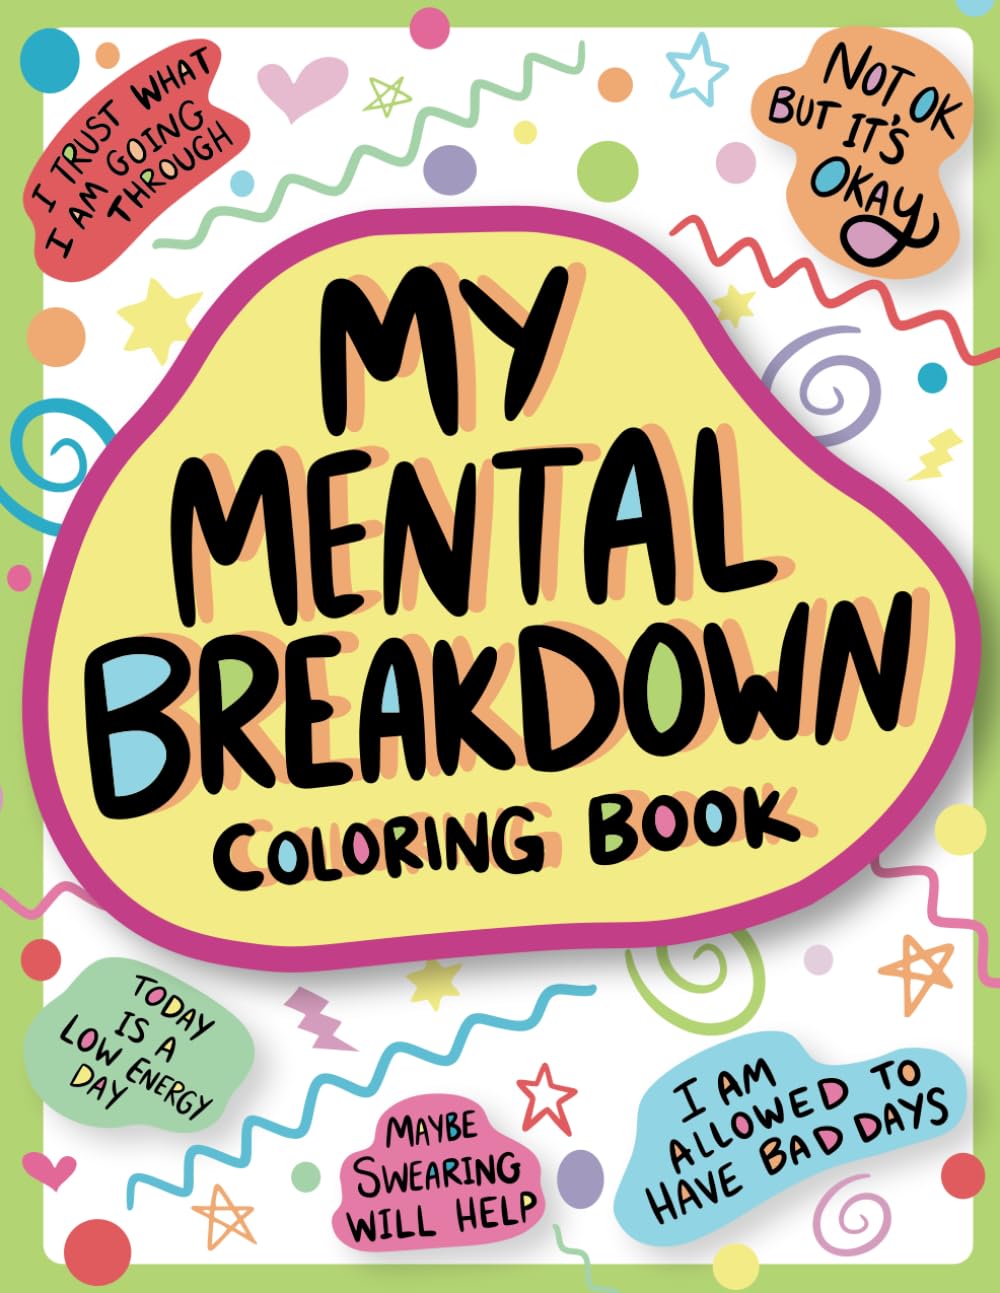 My Mental Breakdown Coloring Book for Adults: Funny Self Care Motivational Affirmations & Stress Relief Art with Encouraging Quotes to Cheer you Up and Hand Drawn Designs to Make you Laugh